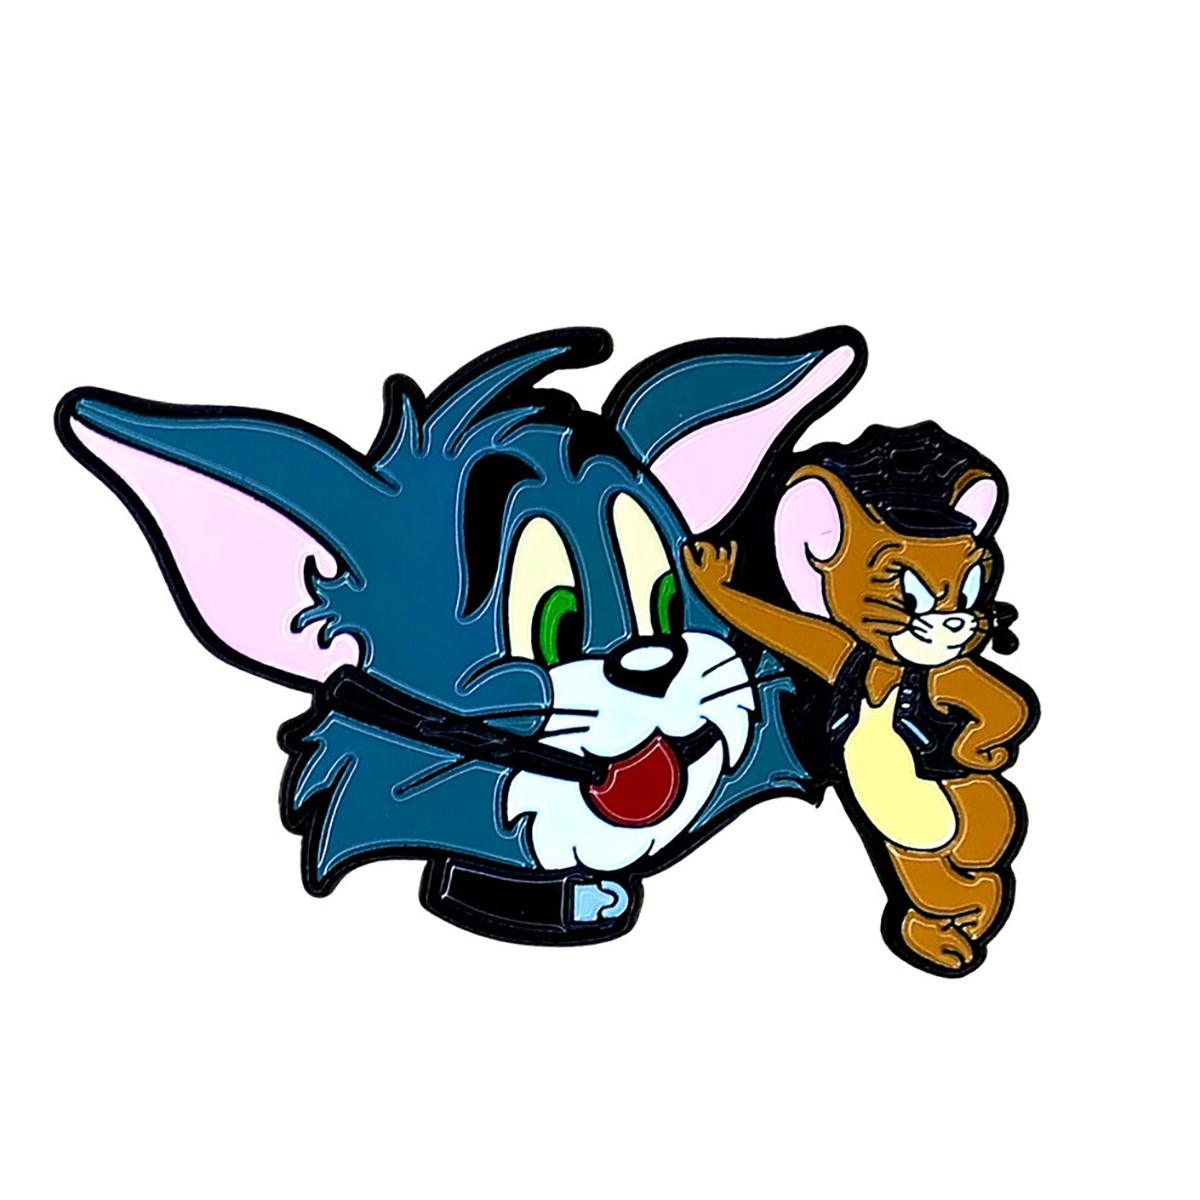 Pin on Tom And Jerry